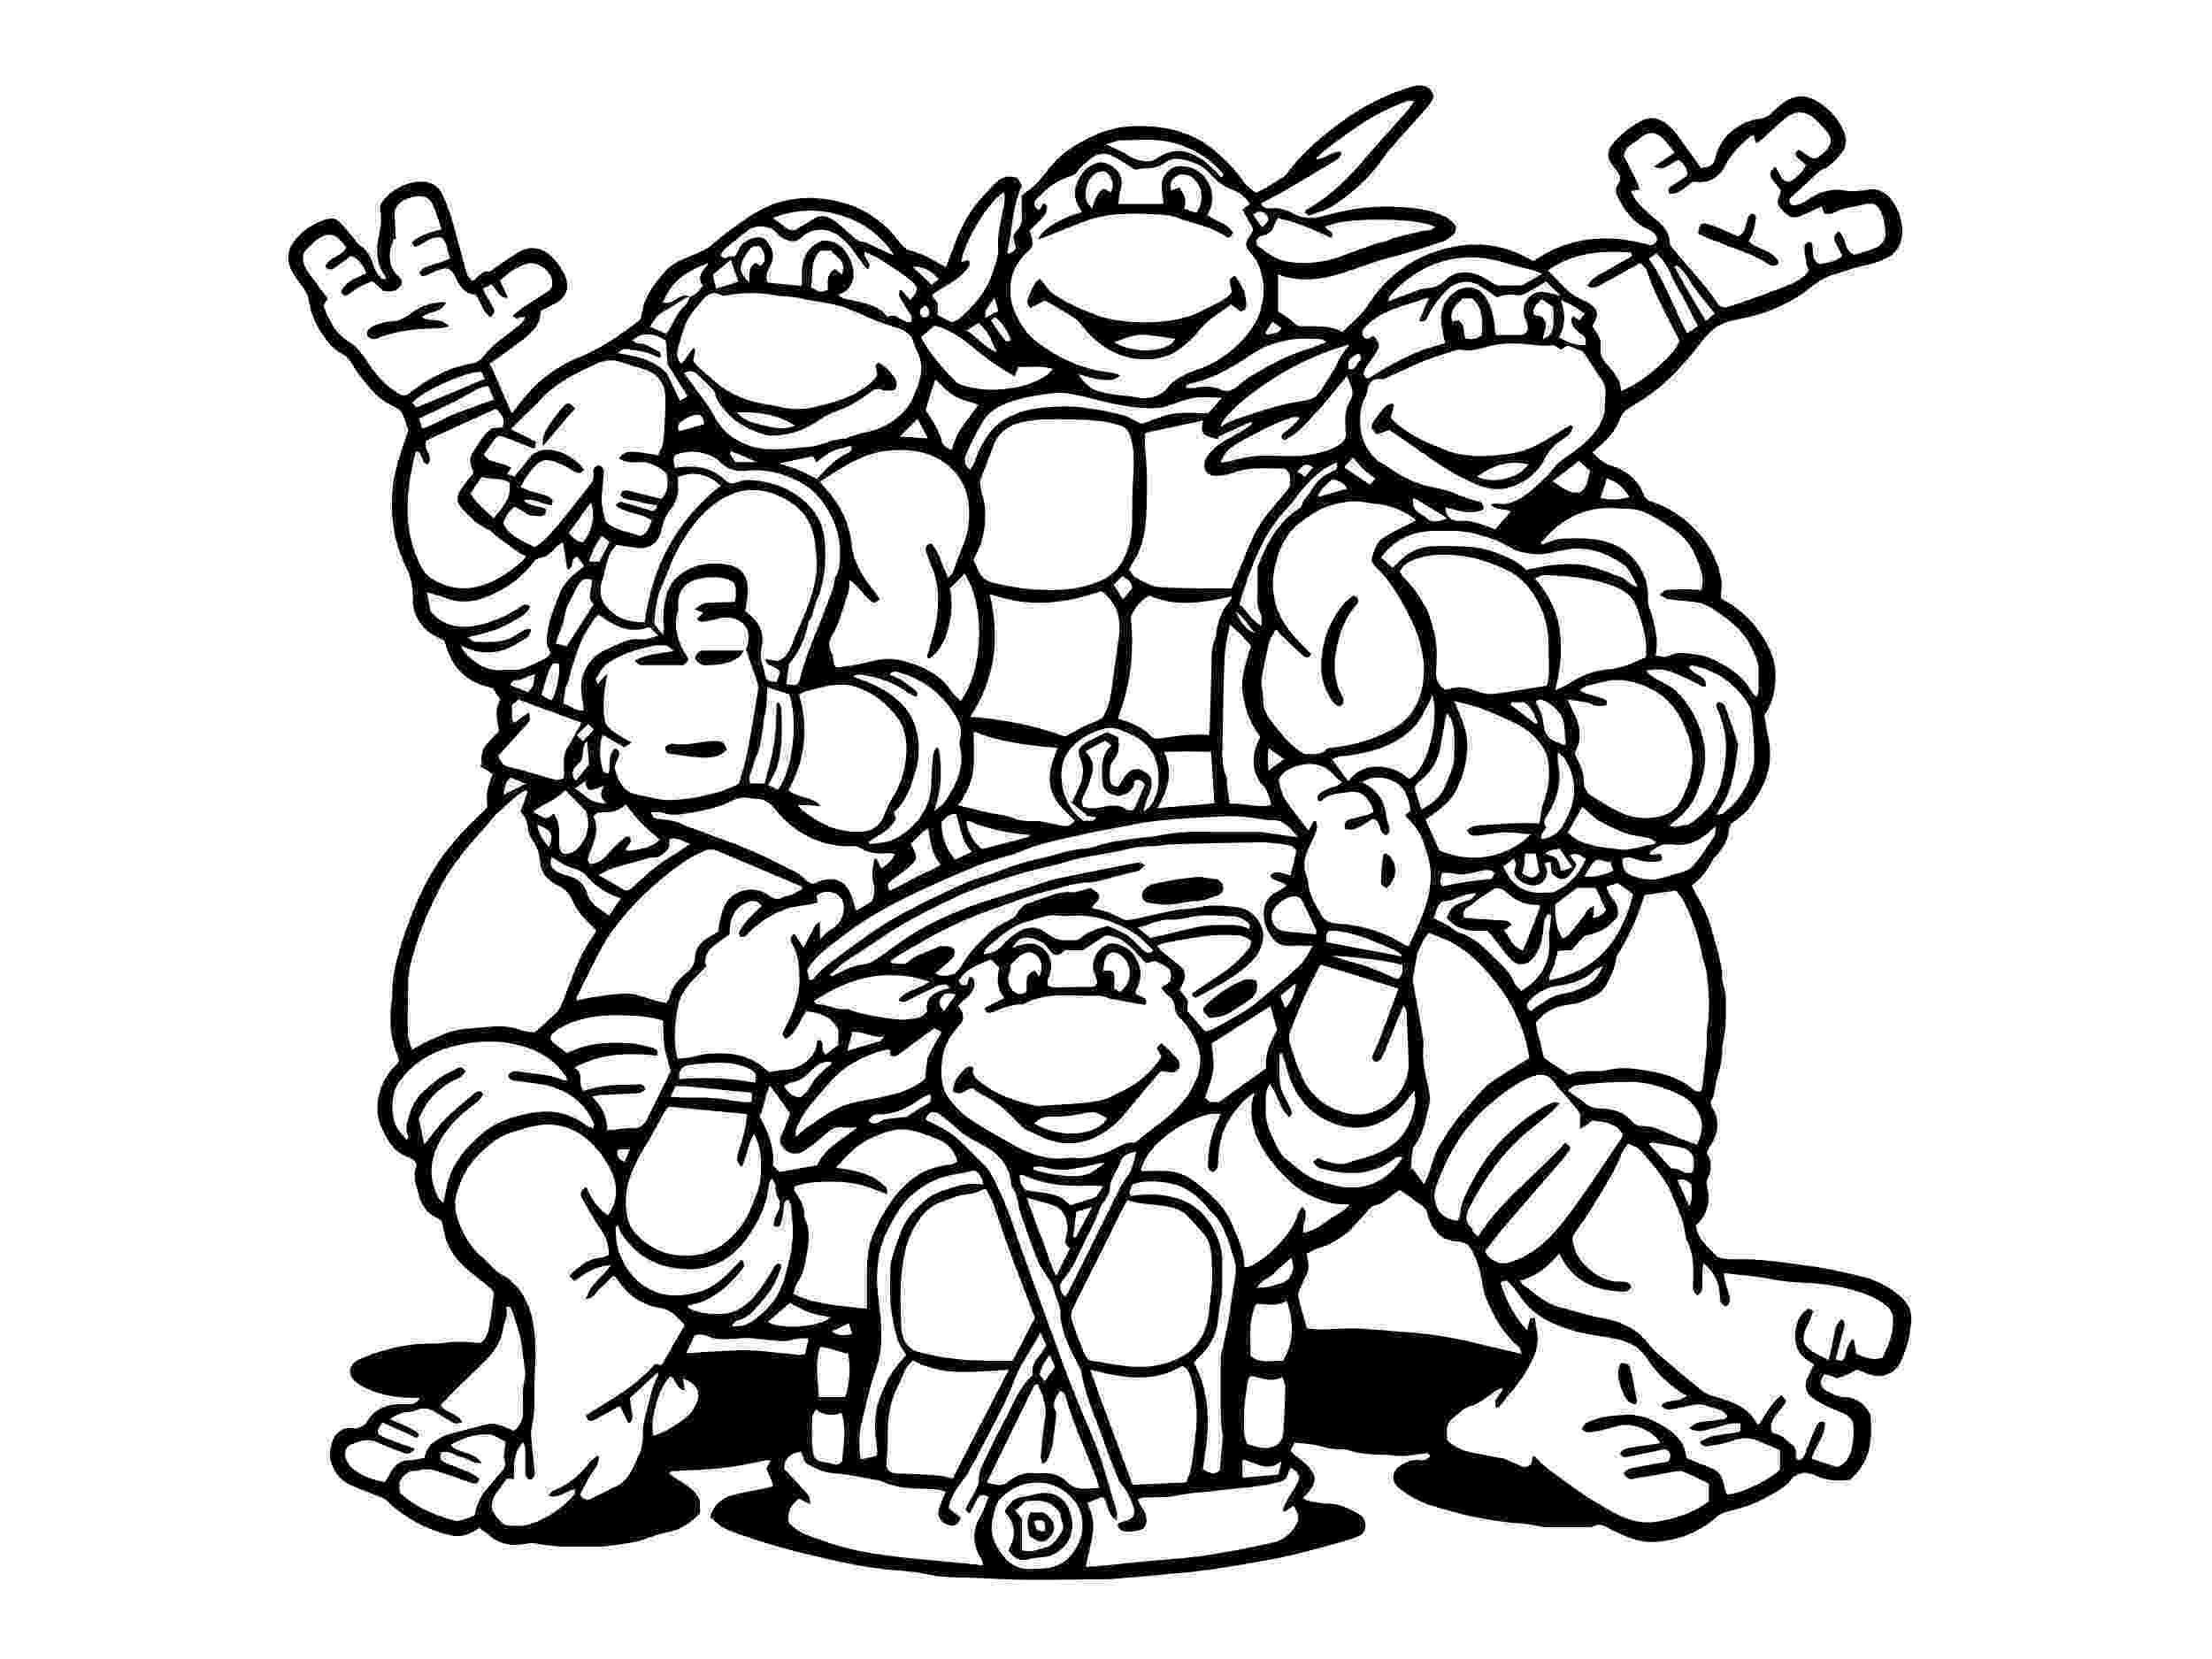 teenage mutant ninja turtles coloring pages print download the attractive ninja coloring pages for coloring mutant turtles ninja teenage pages 